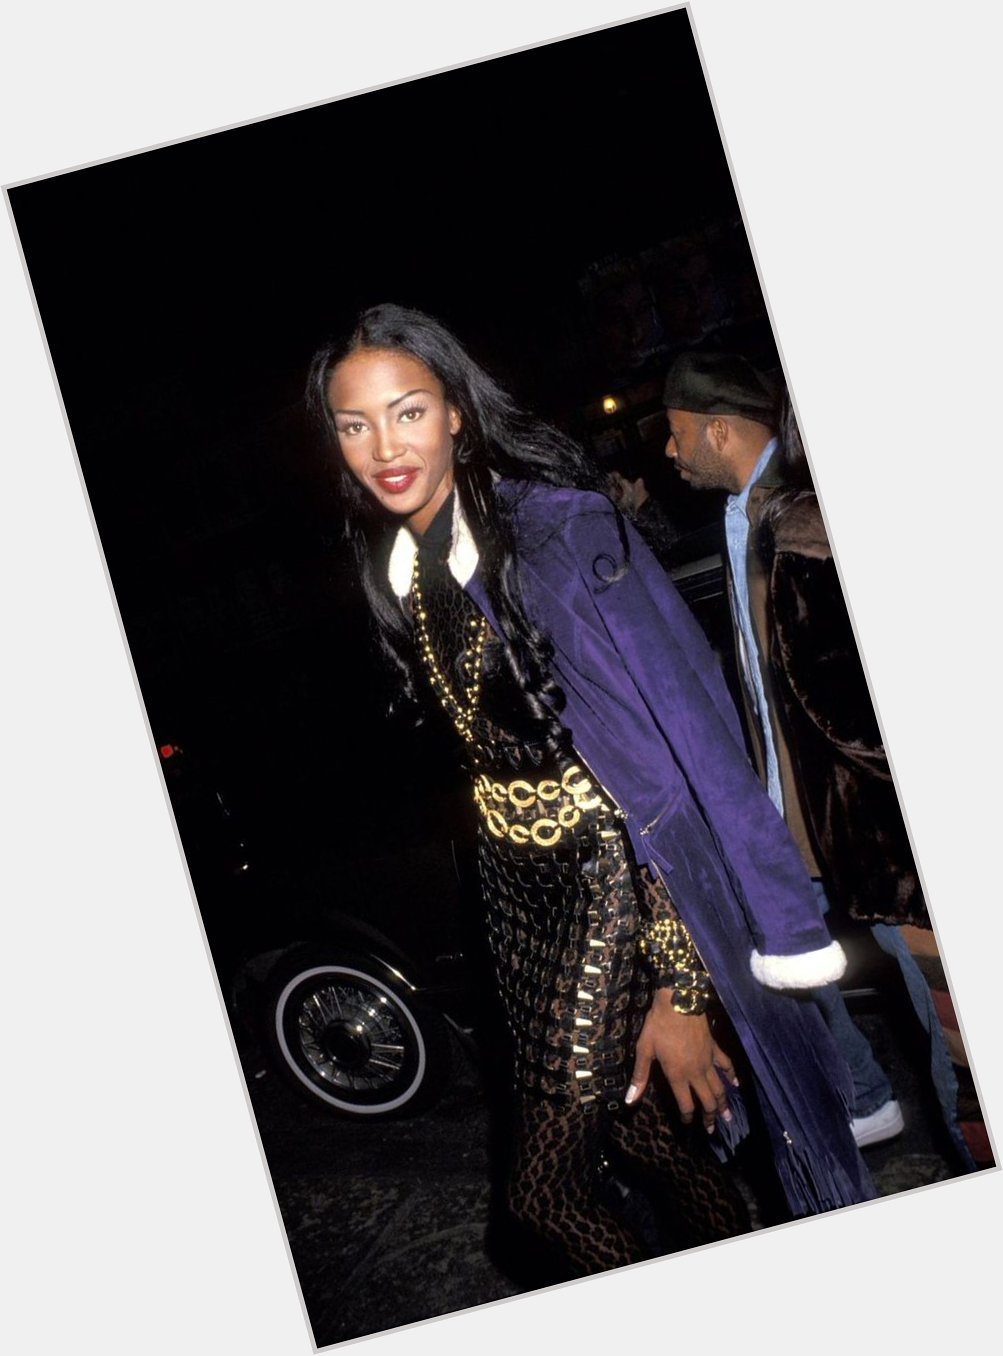 It\s Naomi Campbell\s 50th birthday! Happy birthday to my forever modelling inspiration 